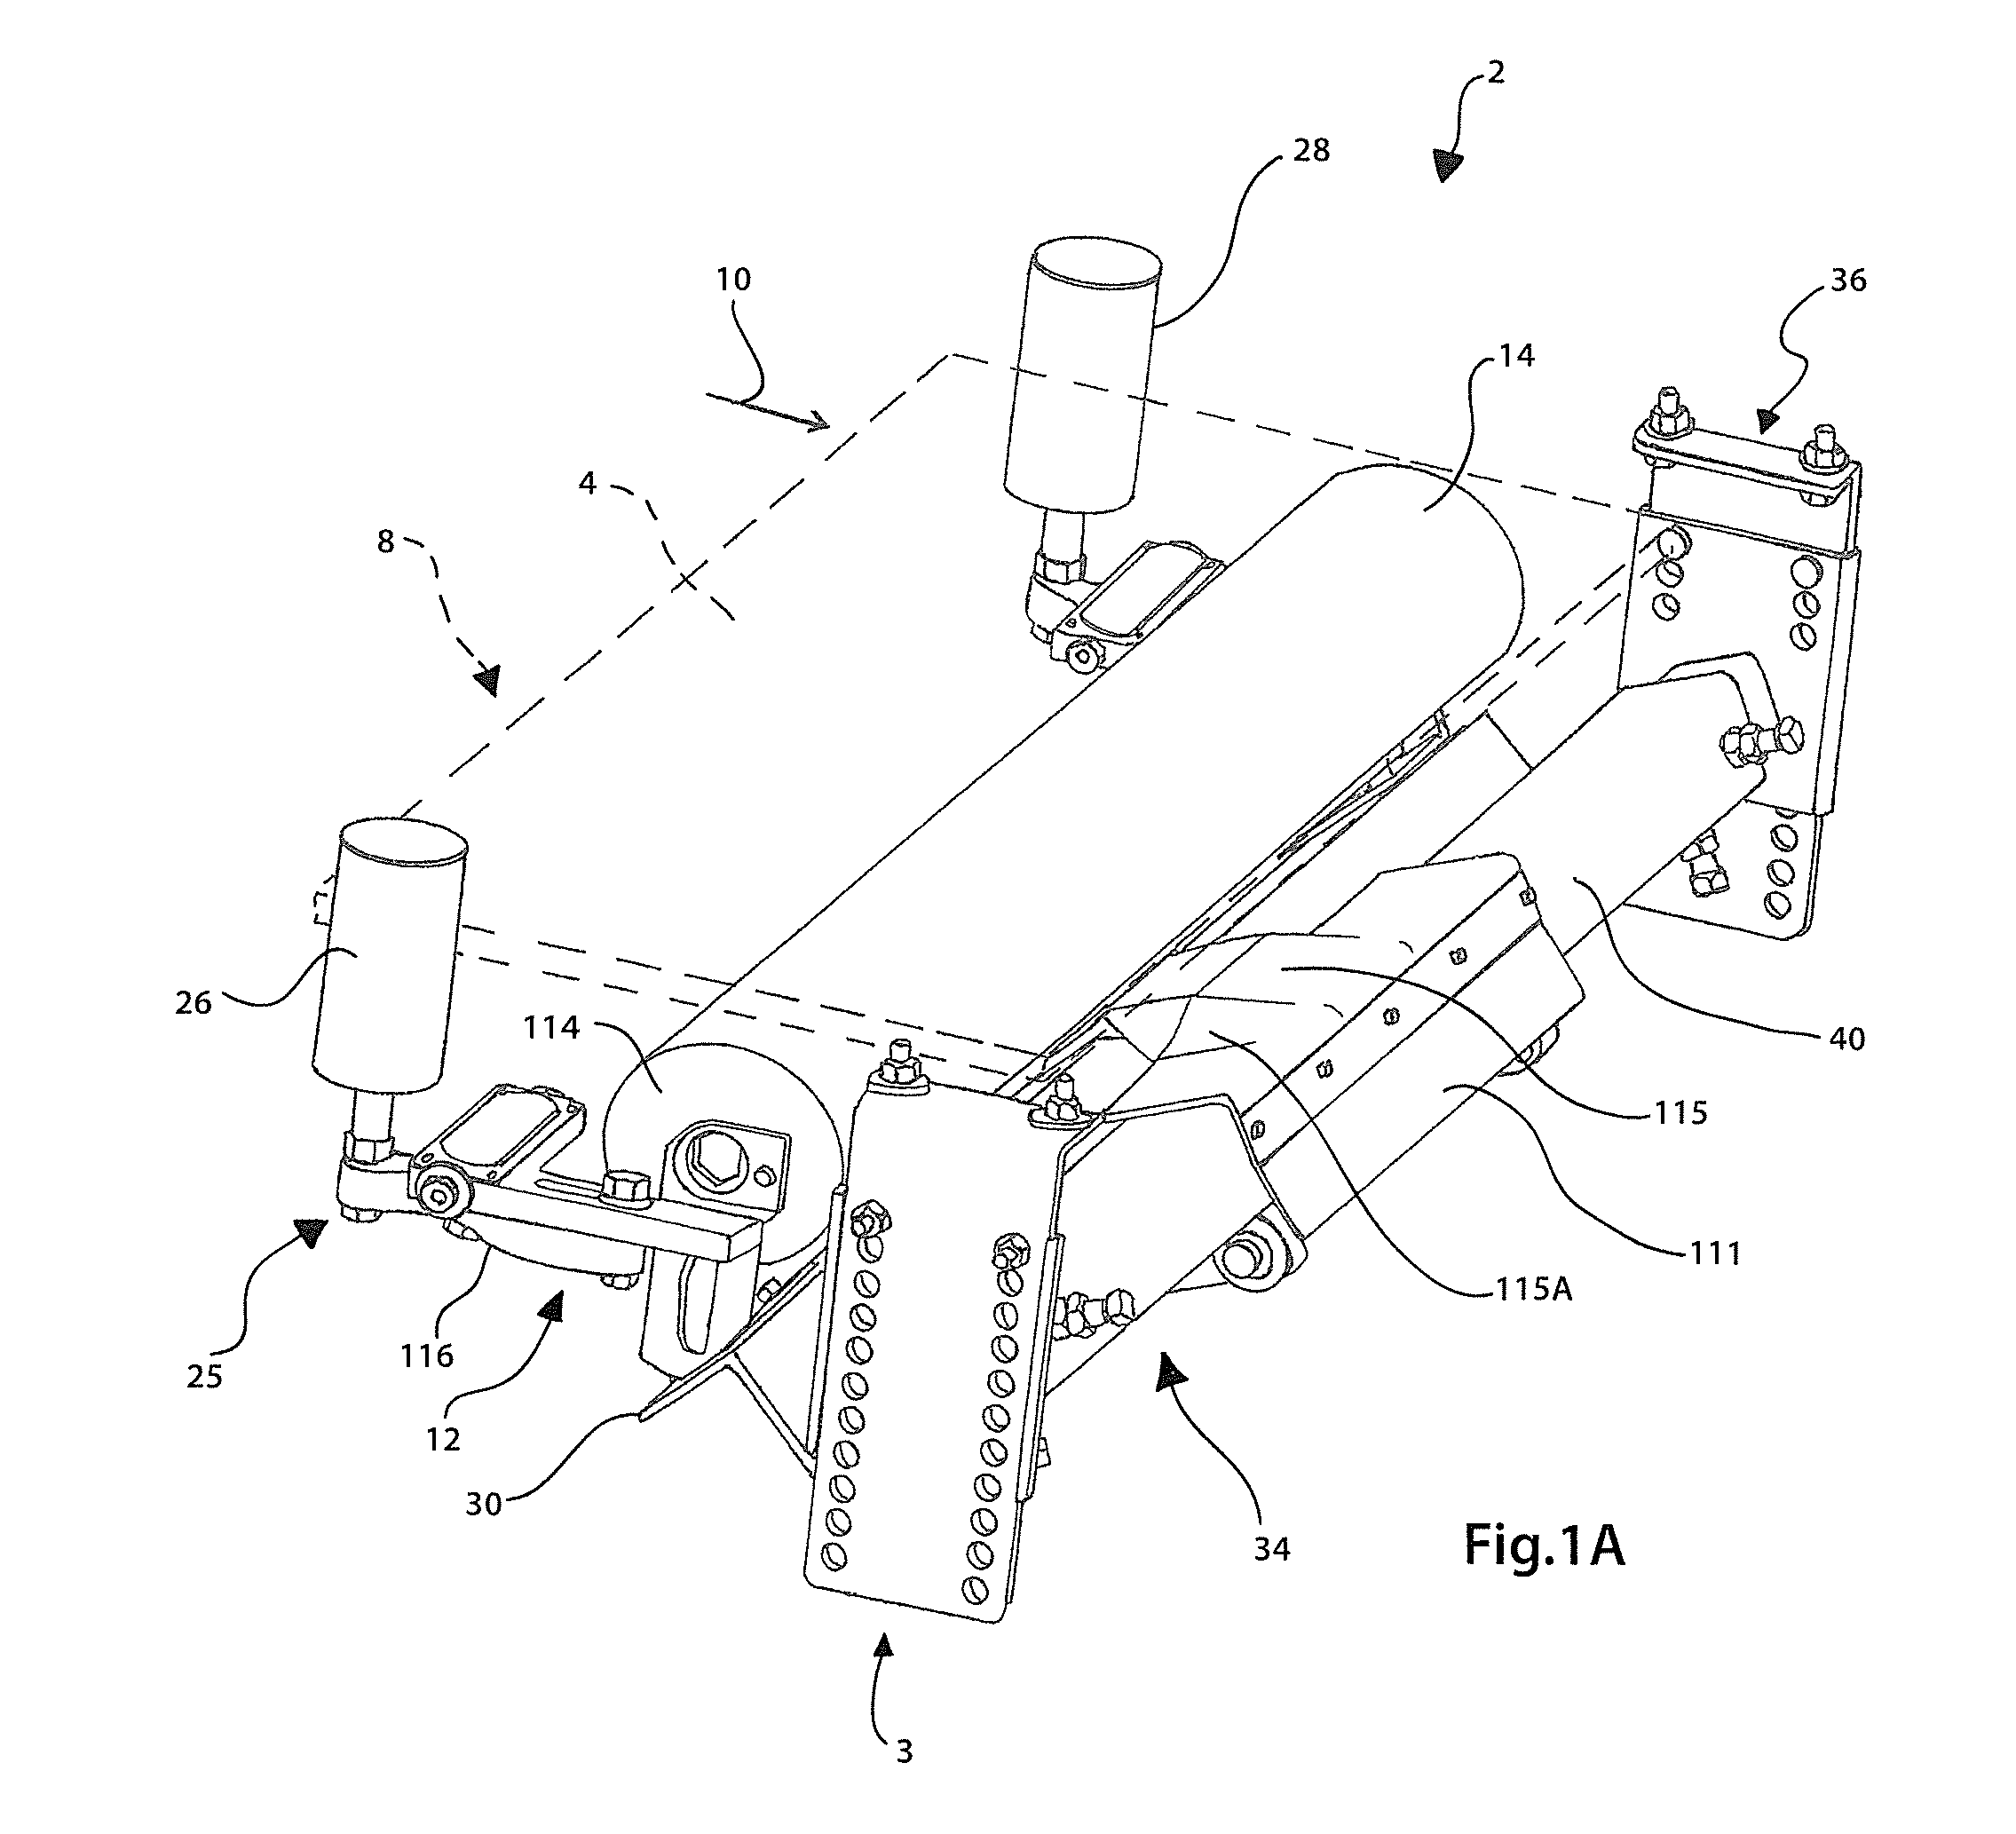 Method and apparatus for tracking conveyor belts